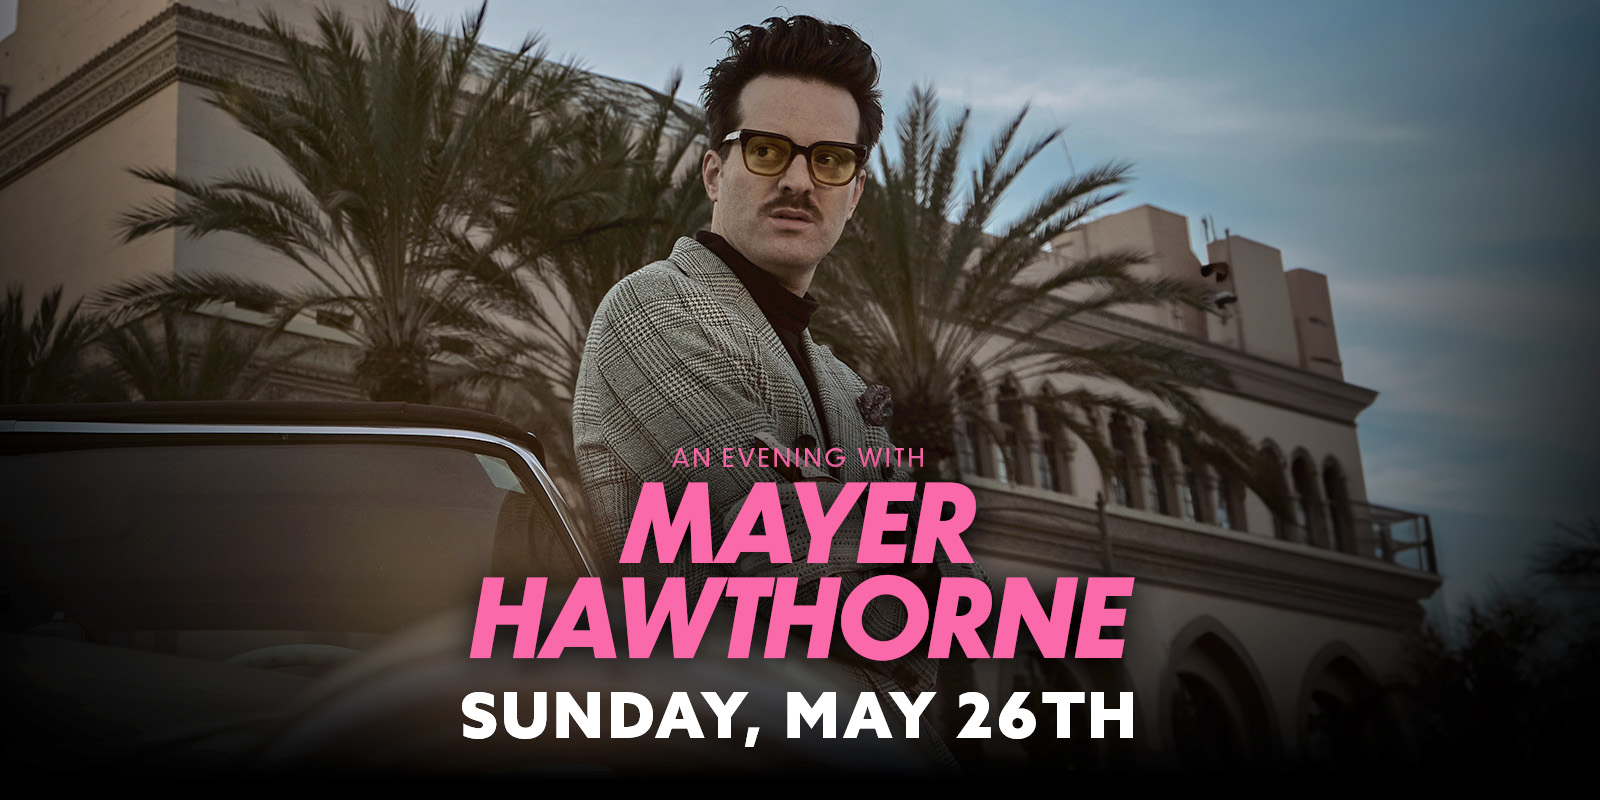 Mayer Hawthorne with his arms crossed leaning against a car